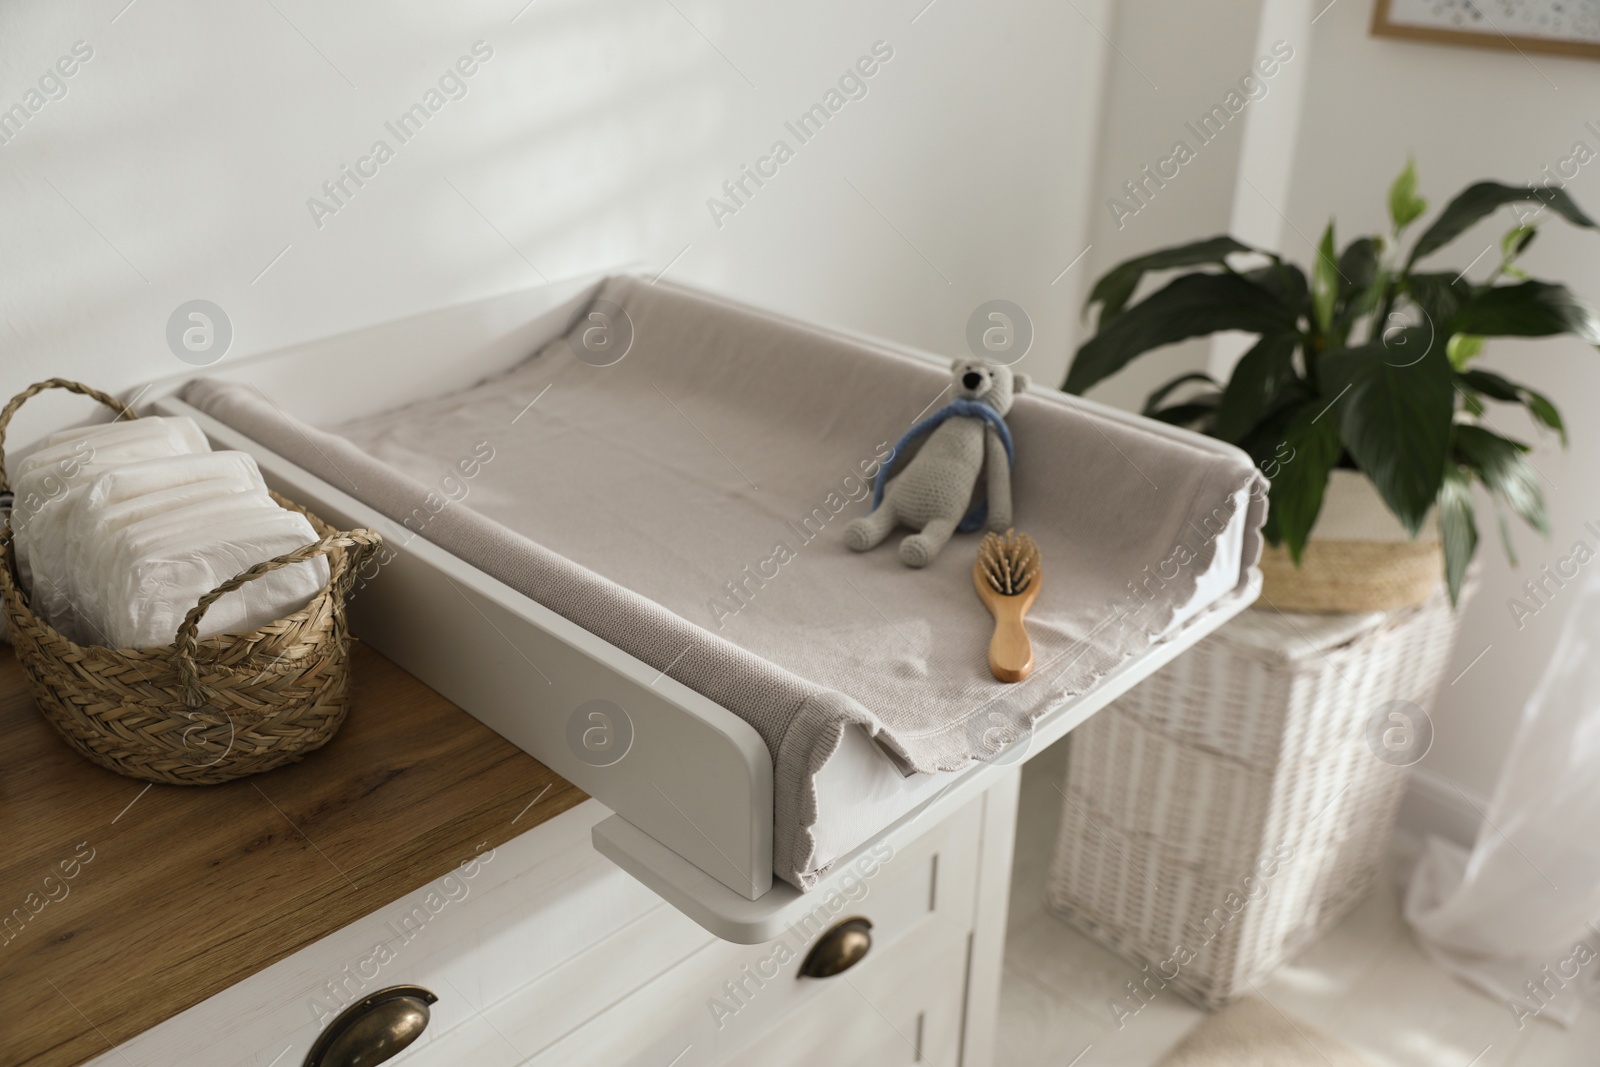 Photo of Chest of drawers with changing pad and tray in nursery. Baby room interior design